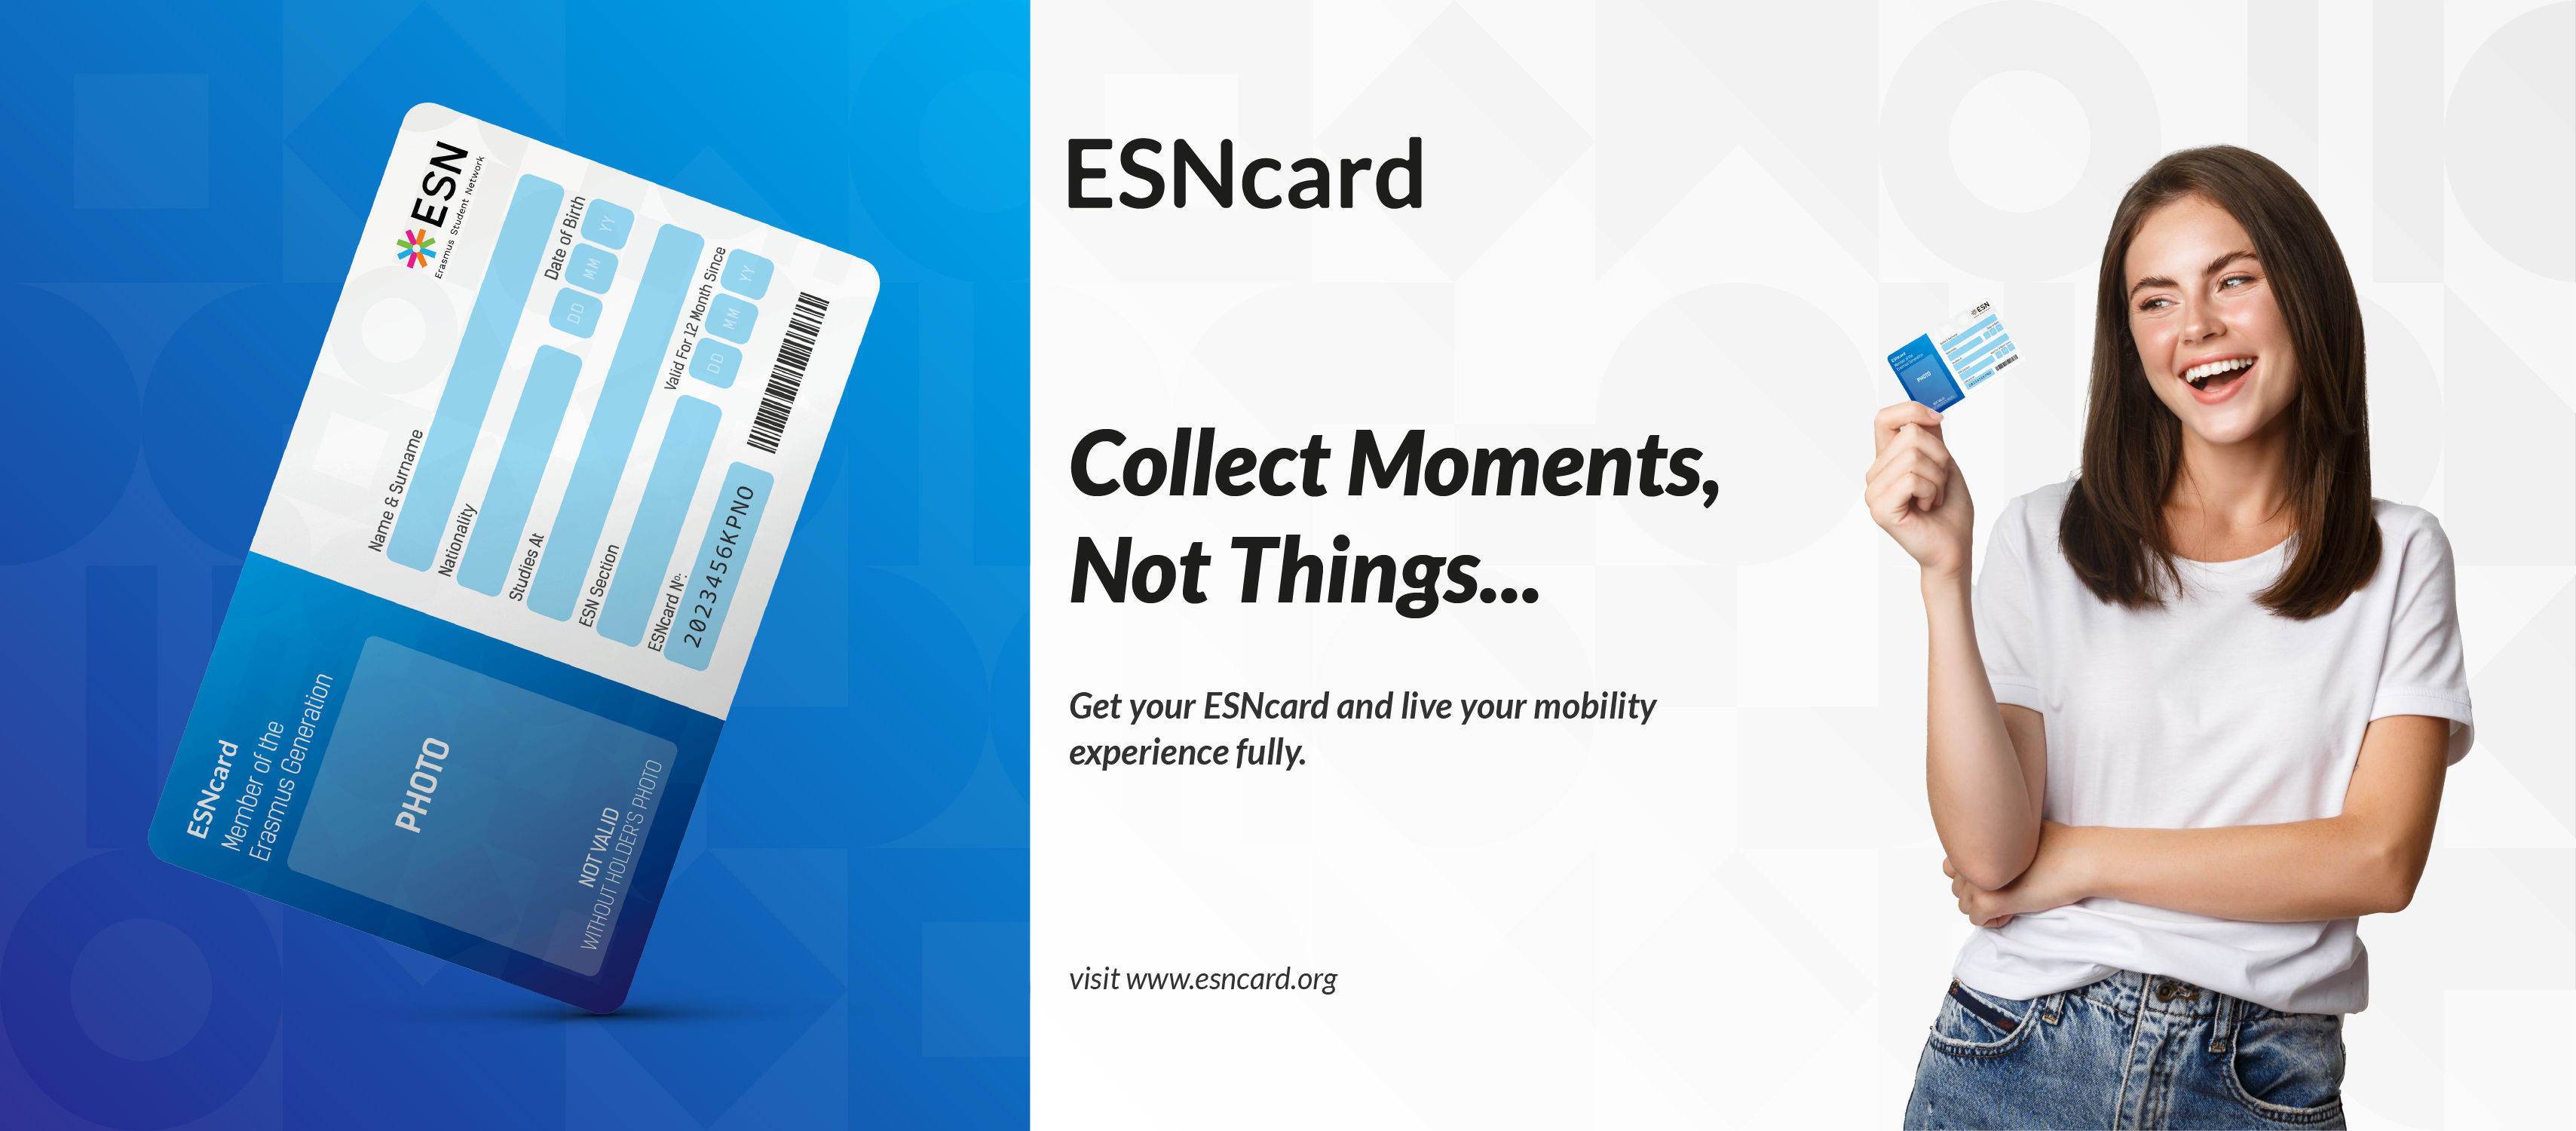 Click to get your ESNcard